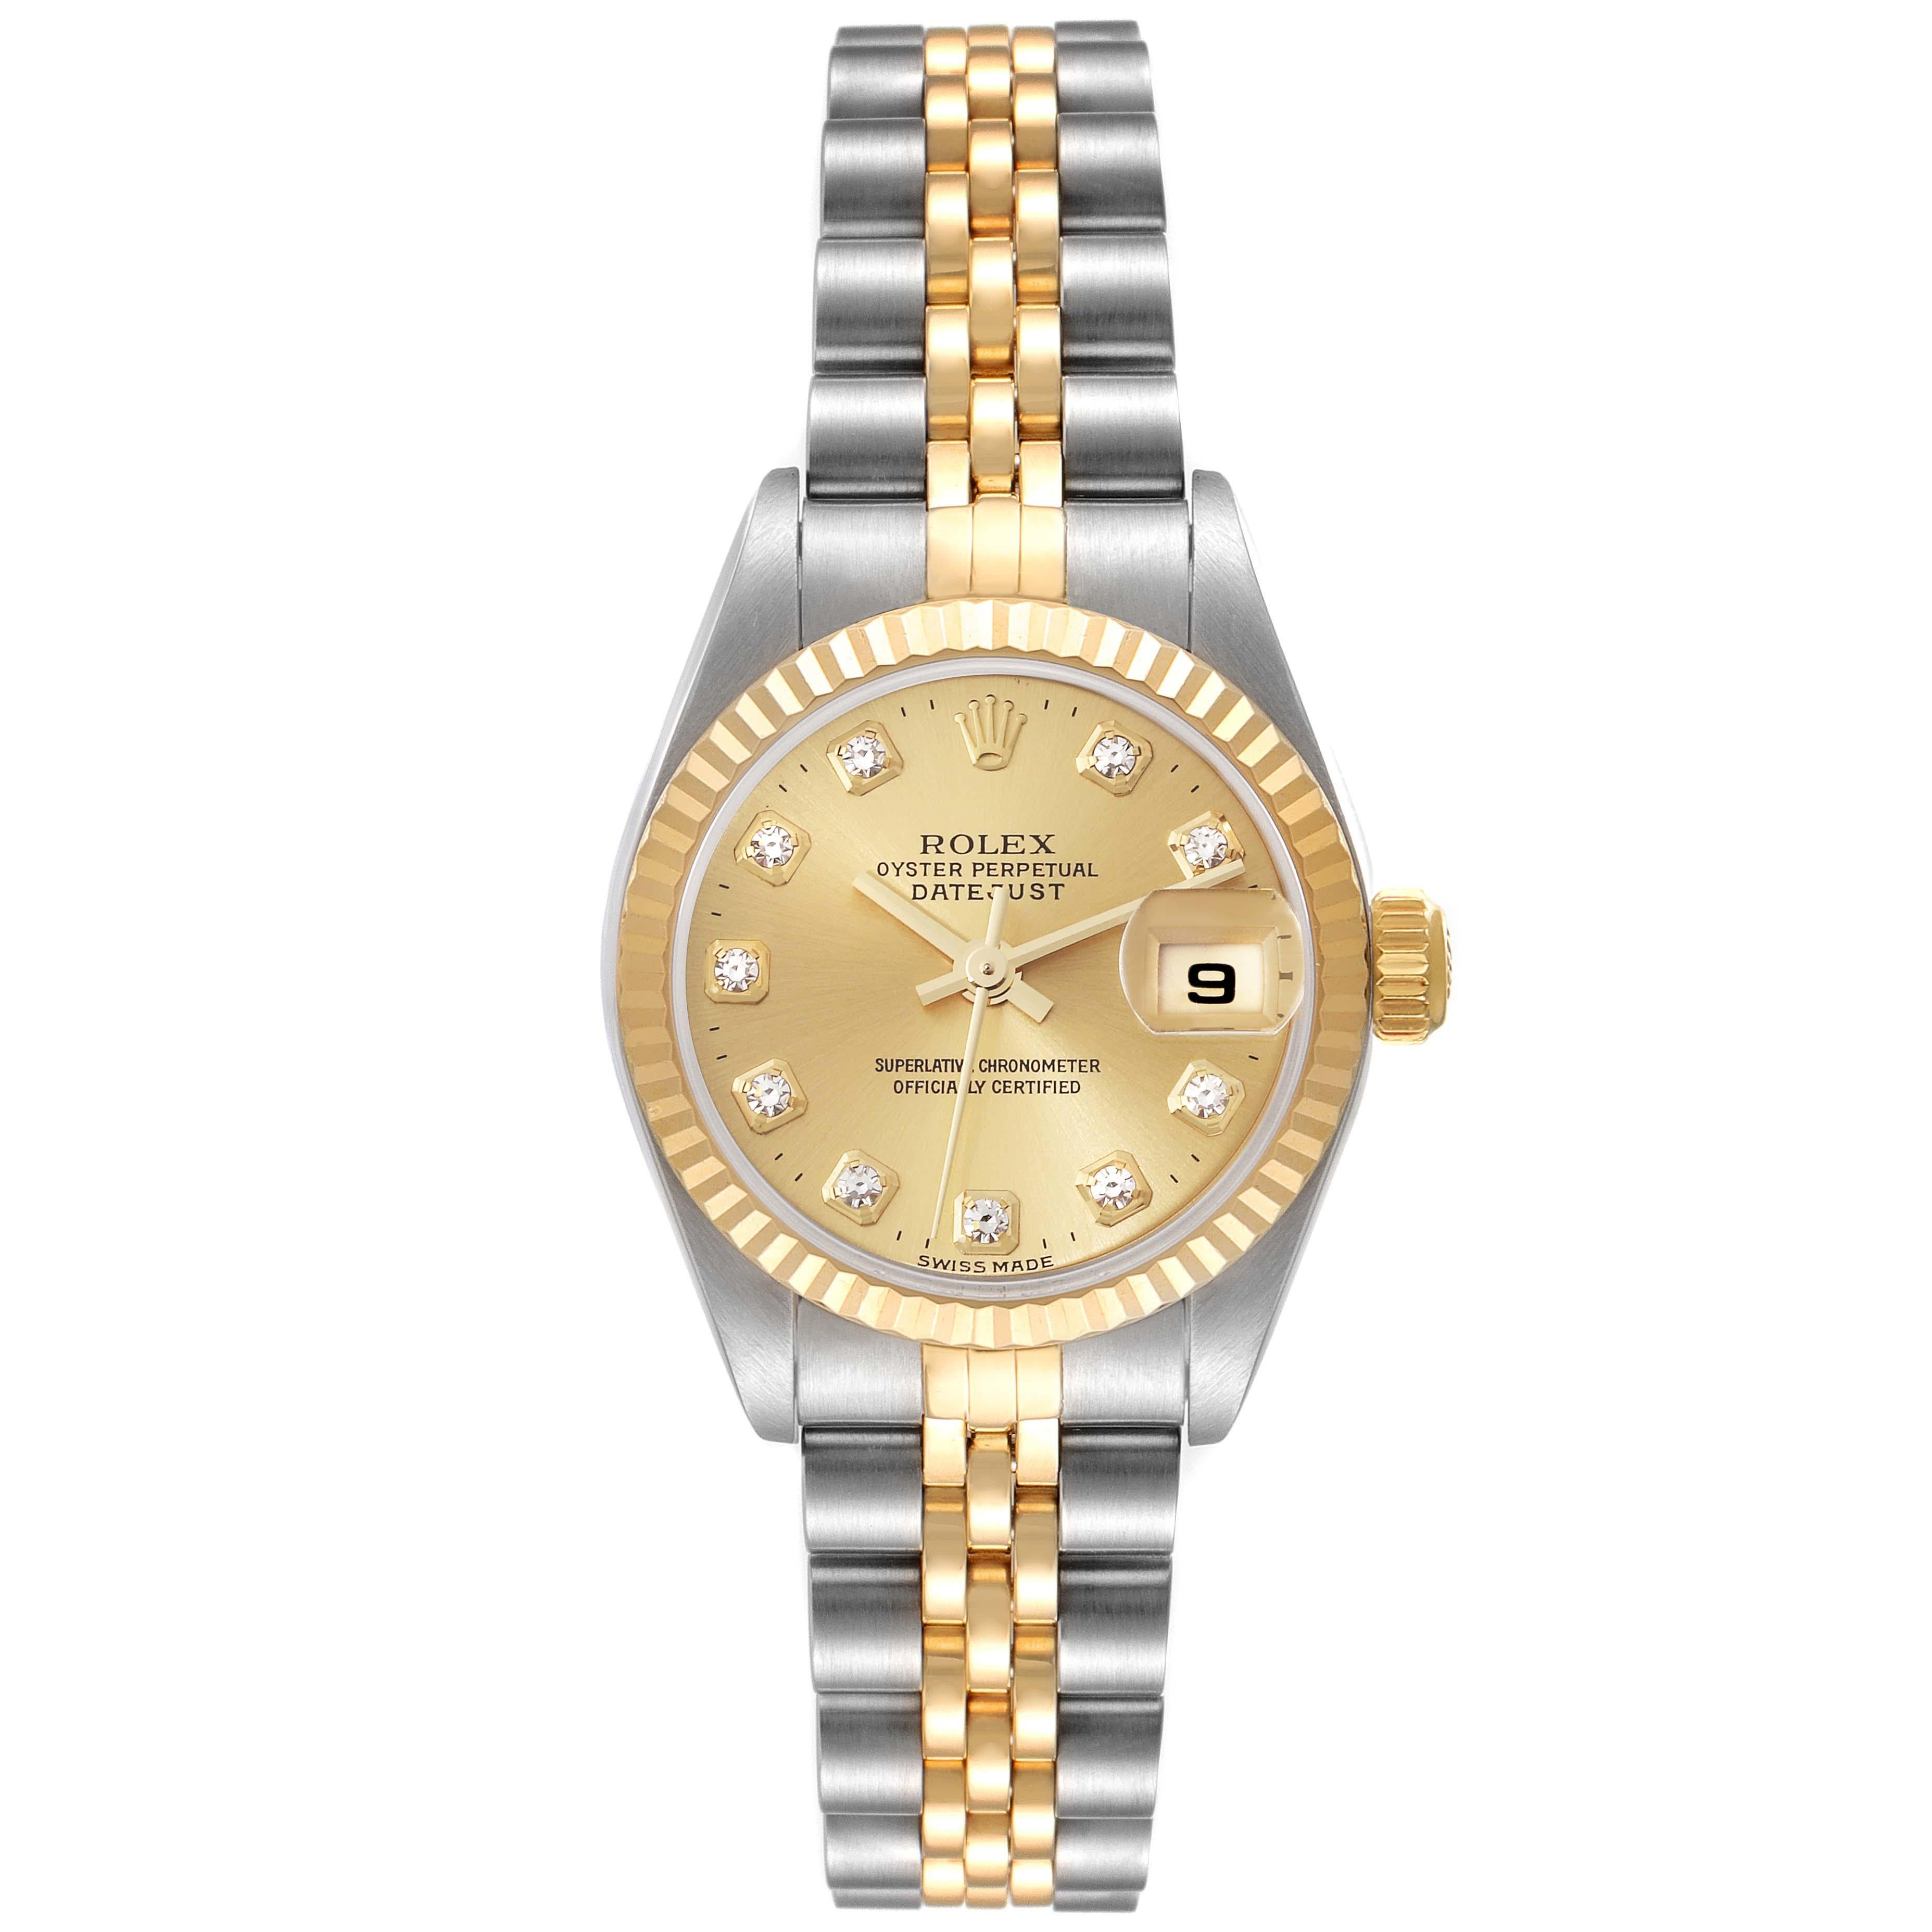 Rolex Datejust Steel Yellow Gold Diamond Dial Ladies Watch 79173 Box Papers. Officially certified chronometer automatic self-winding movement. Stainless steel oyster case 26 mm in diameter. Rolex logo on an 18K yellow gold crown. 18k yellow gold